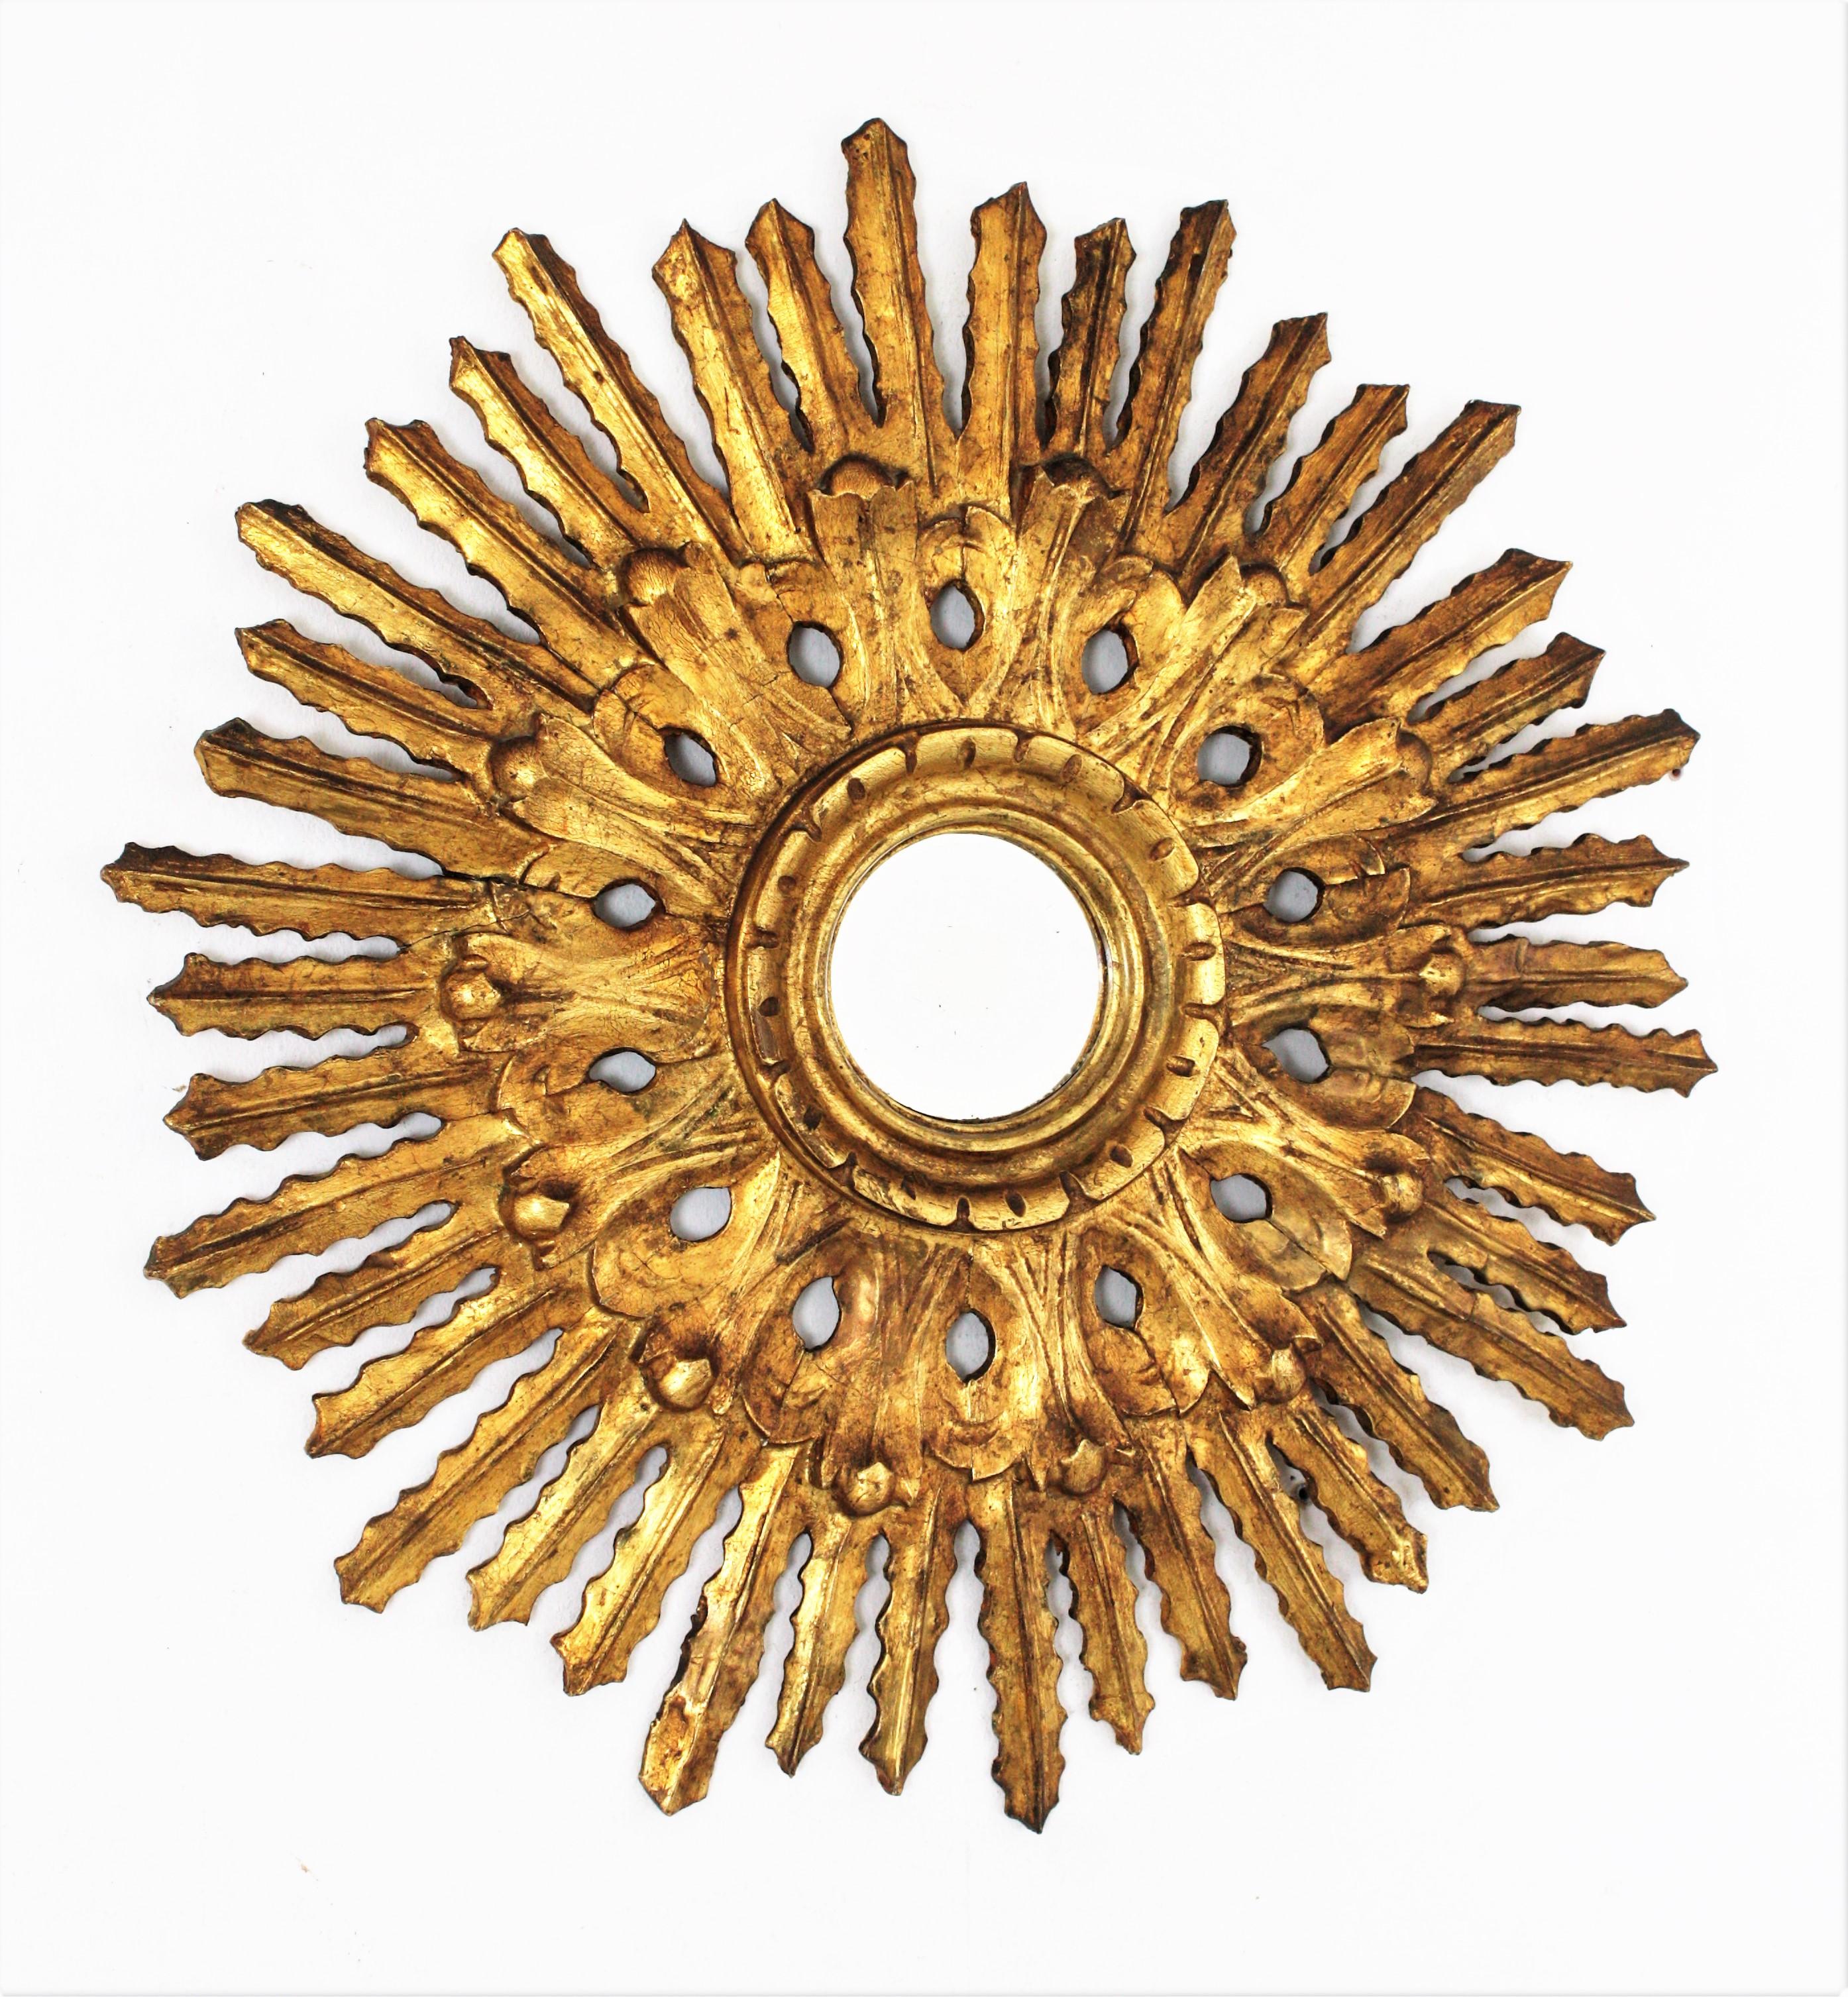 An exquisite finely carved Baroque style sunburst mirror with a carved filigrana decoration surrounding the convex glass. Spain, 1920-1930s.
The sunburst shape and the lovely floral corolla surrounding the glass make this piece highly decorative.